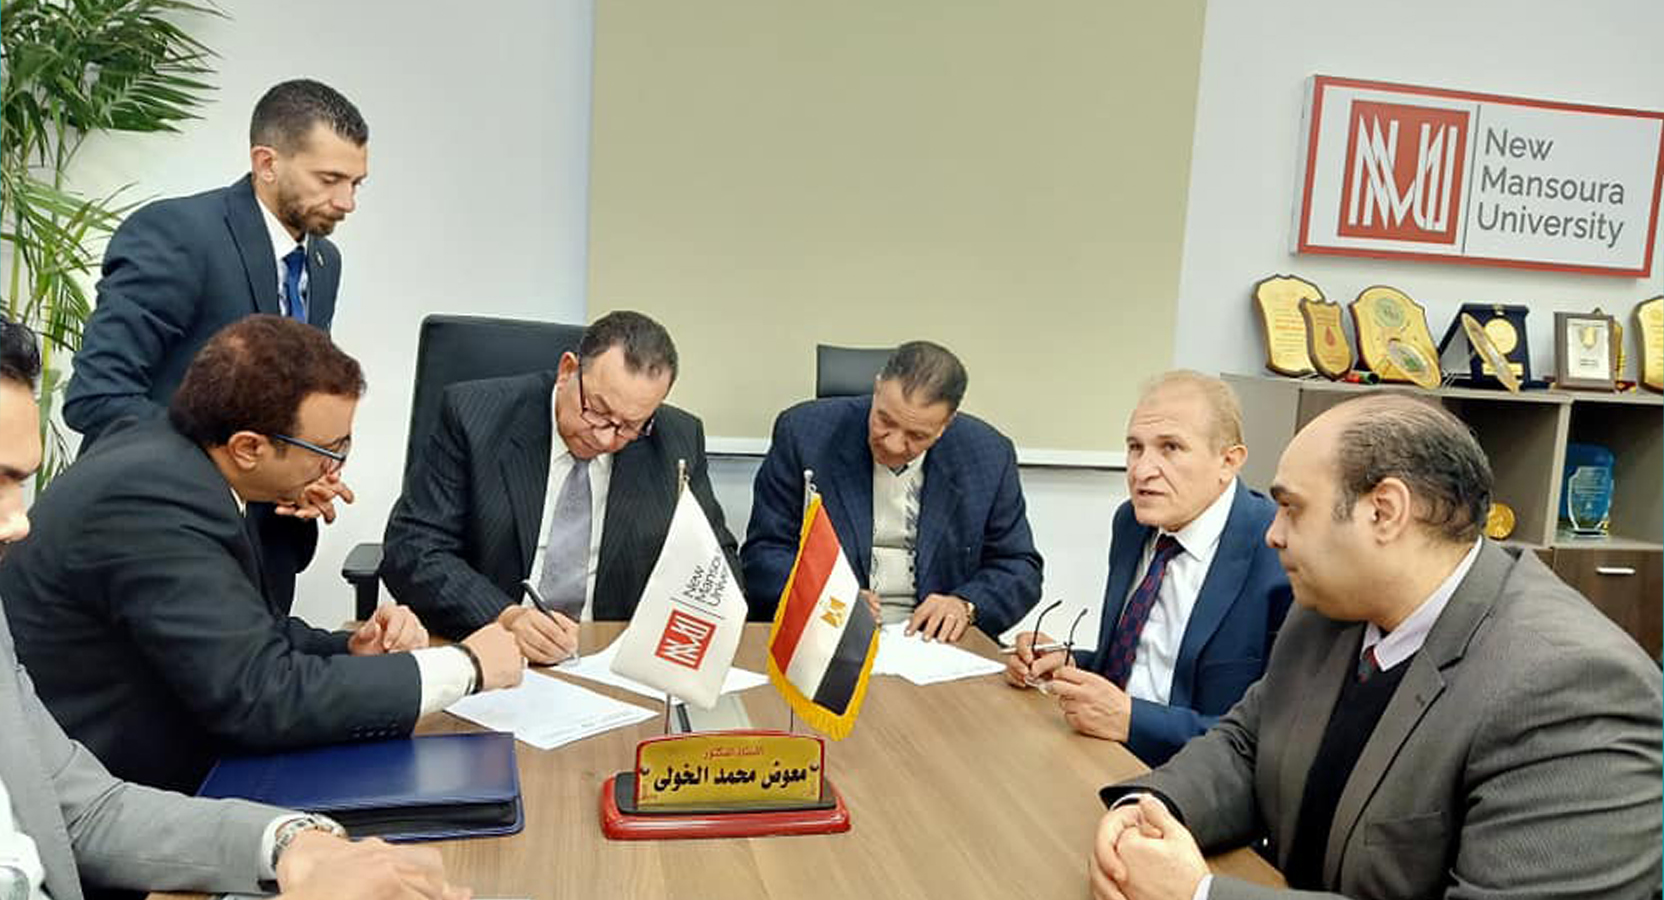 New Mansoura University Signs A Protocol To Provide Various Services To Students, Faculty Members And University Employees With The National Bank Of Egypt